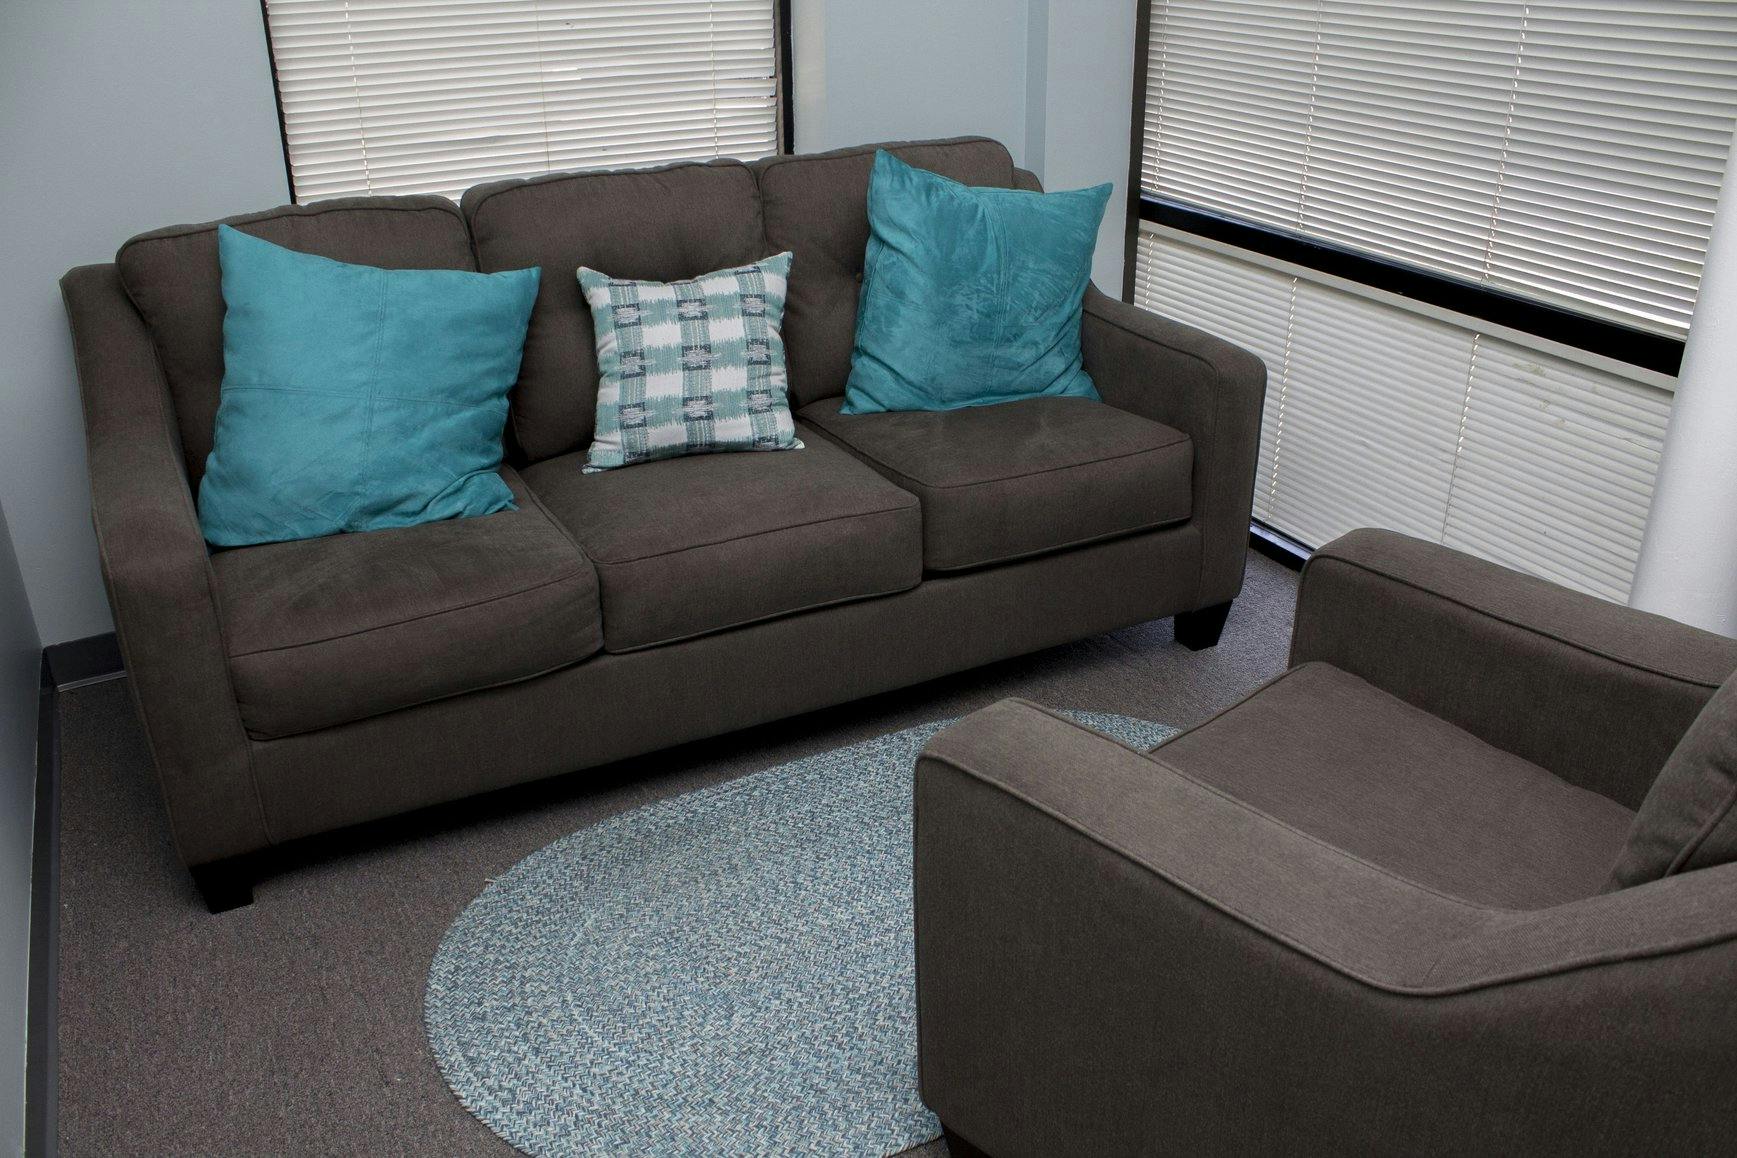 Photo of our counseling couch and offices